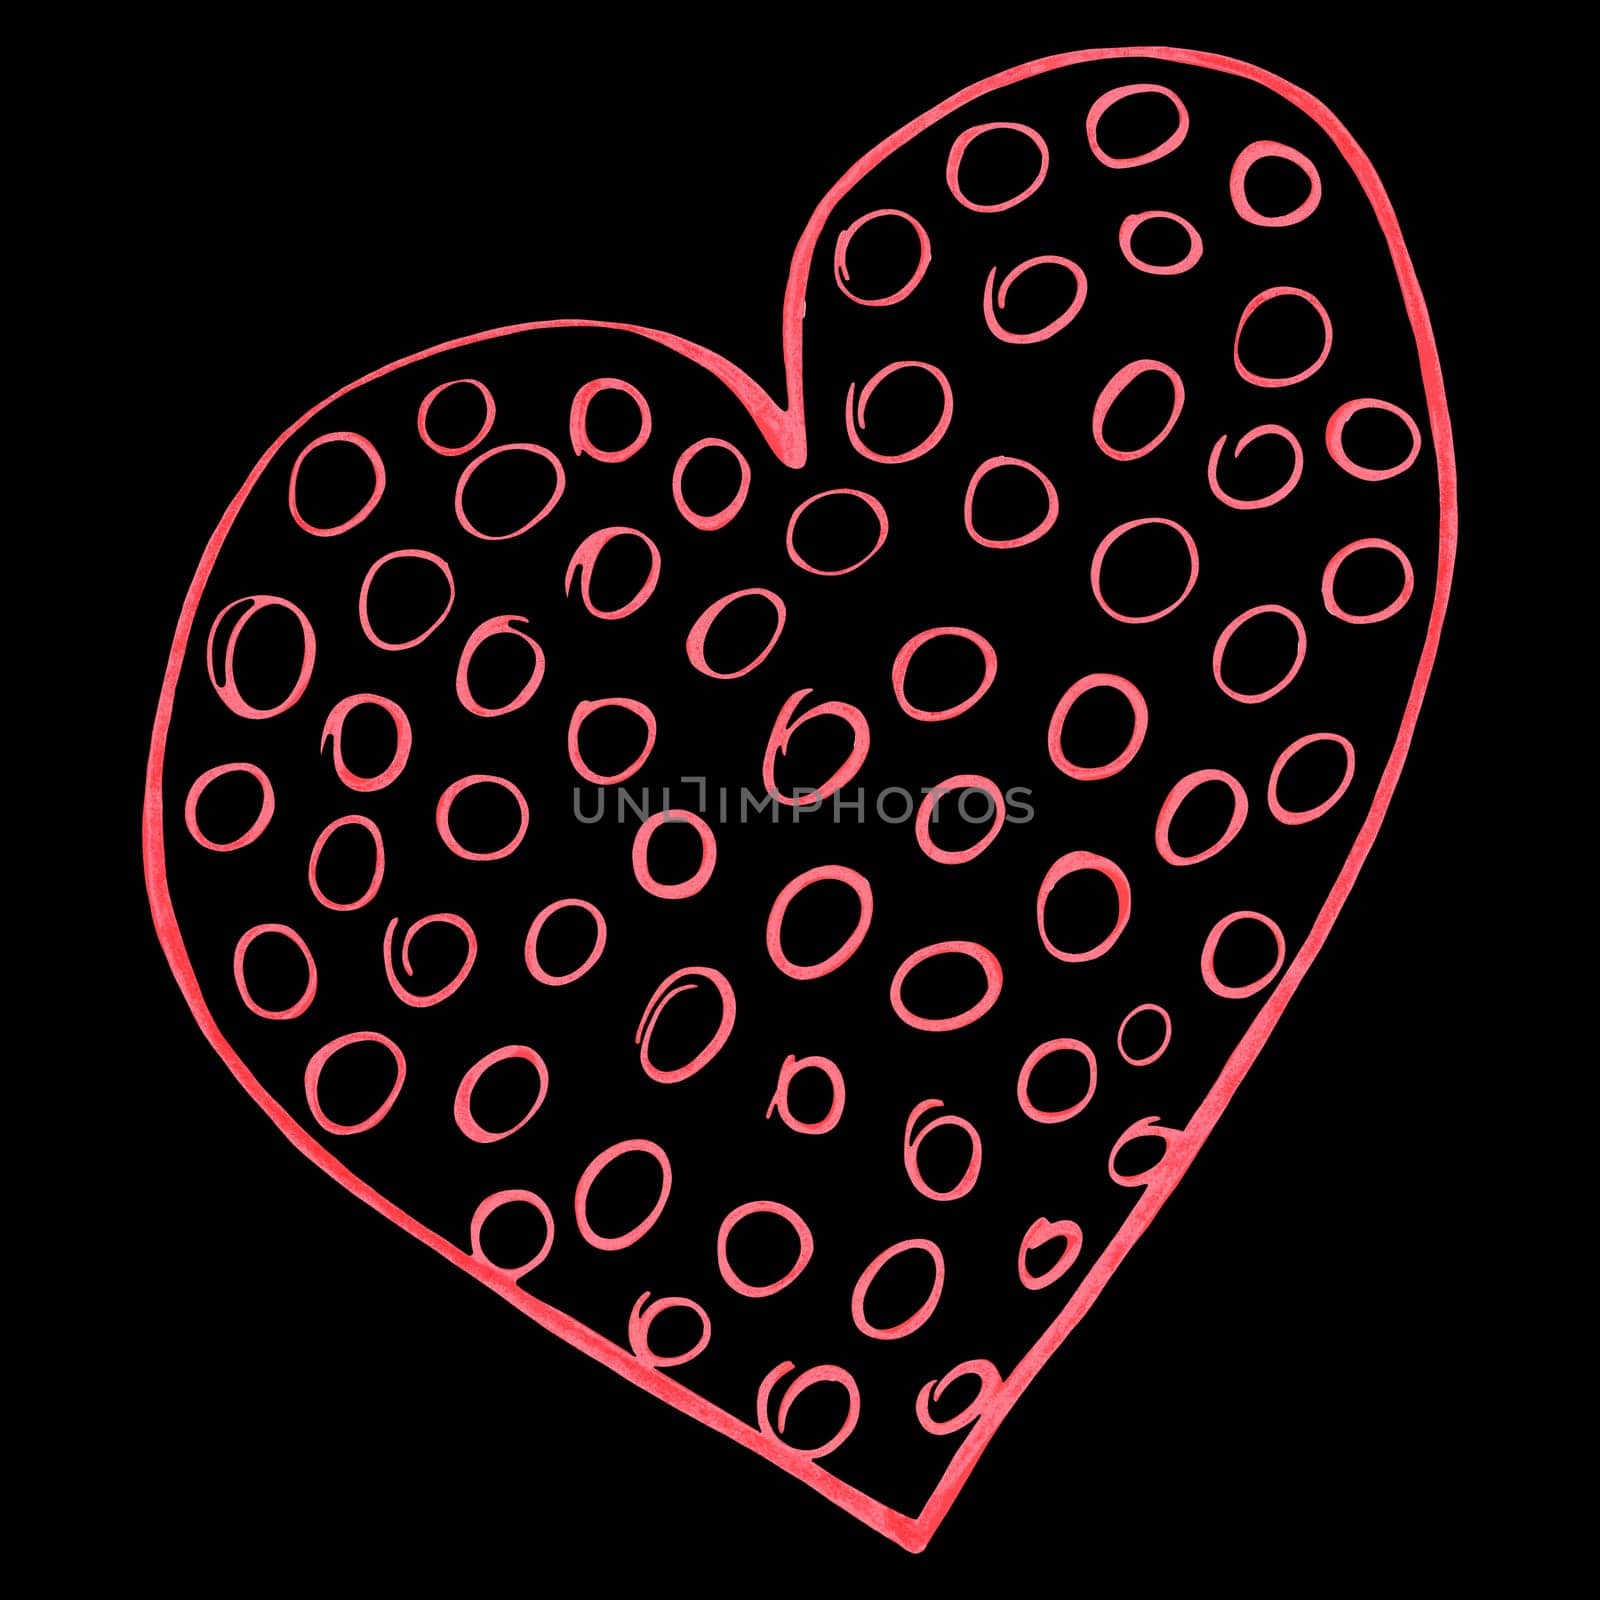 Red Heart Drawn by Colored Pencil. Heart Shape Isolated on Black Background. by Rina_Dozornaya